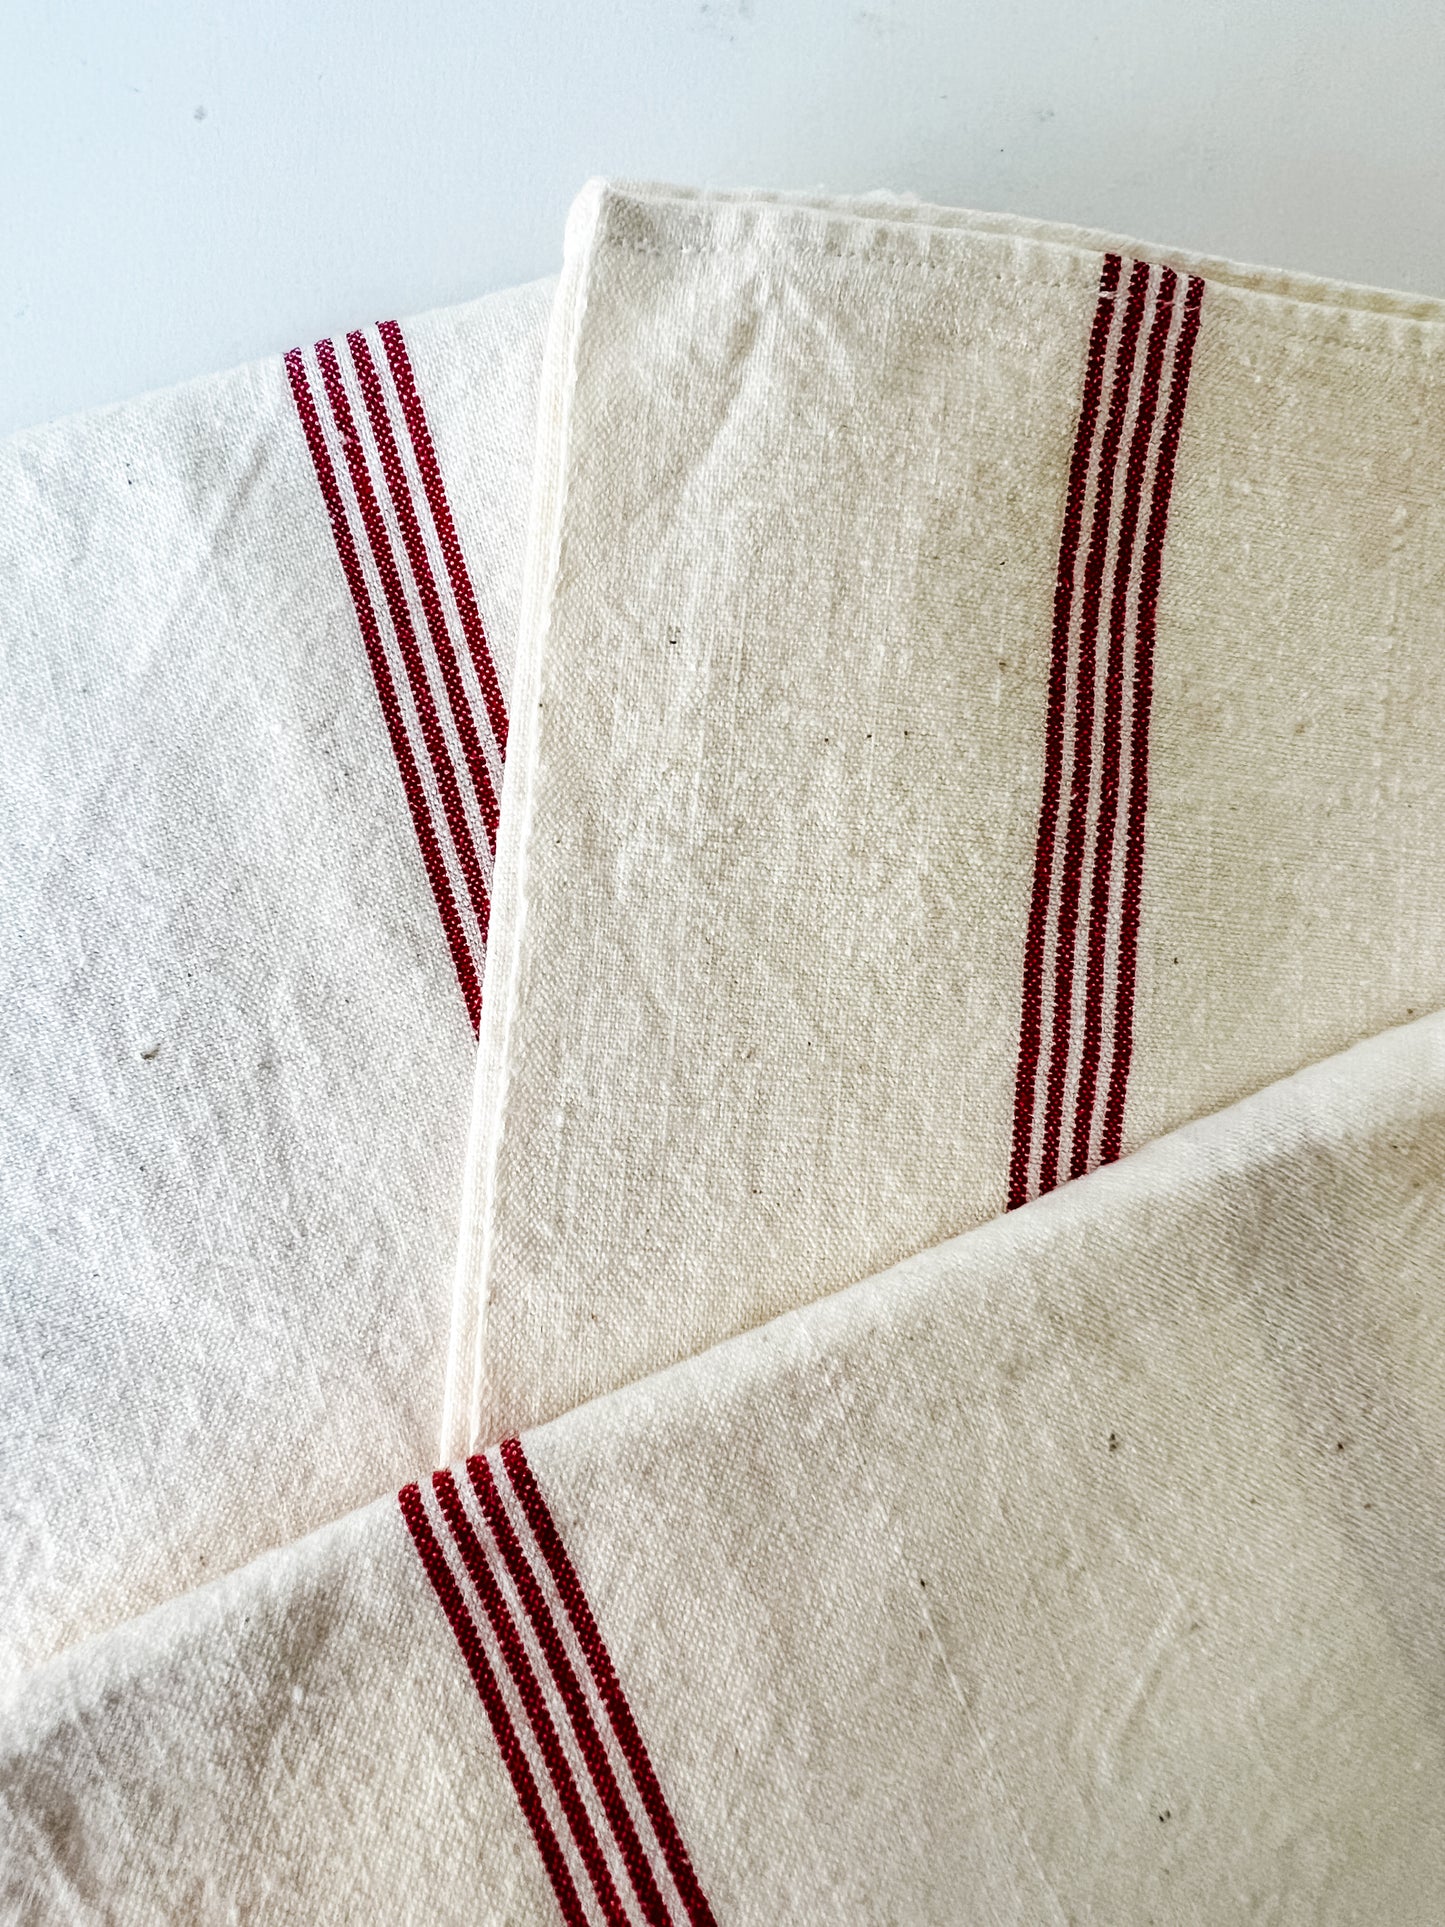 Vintage French Tea Towels (4 thin red stripes)